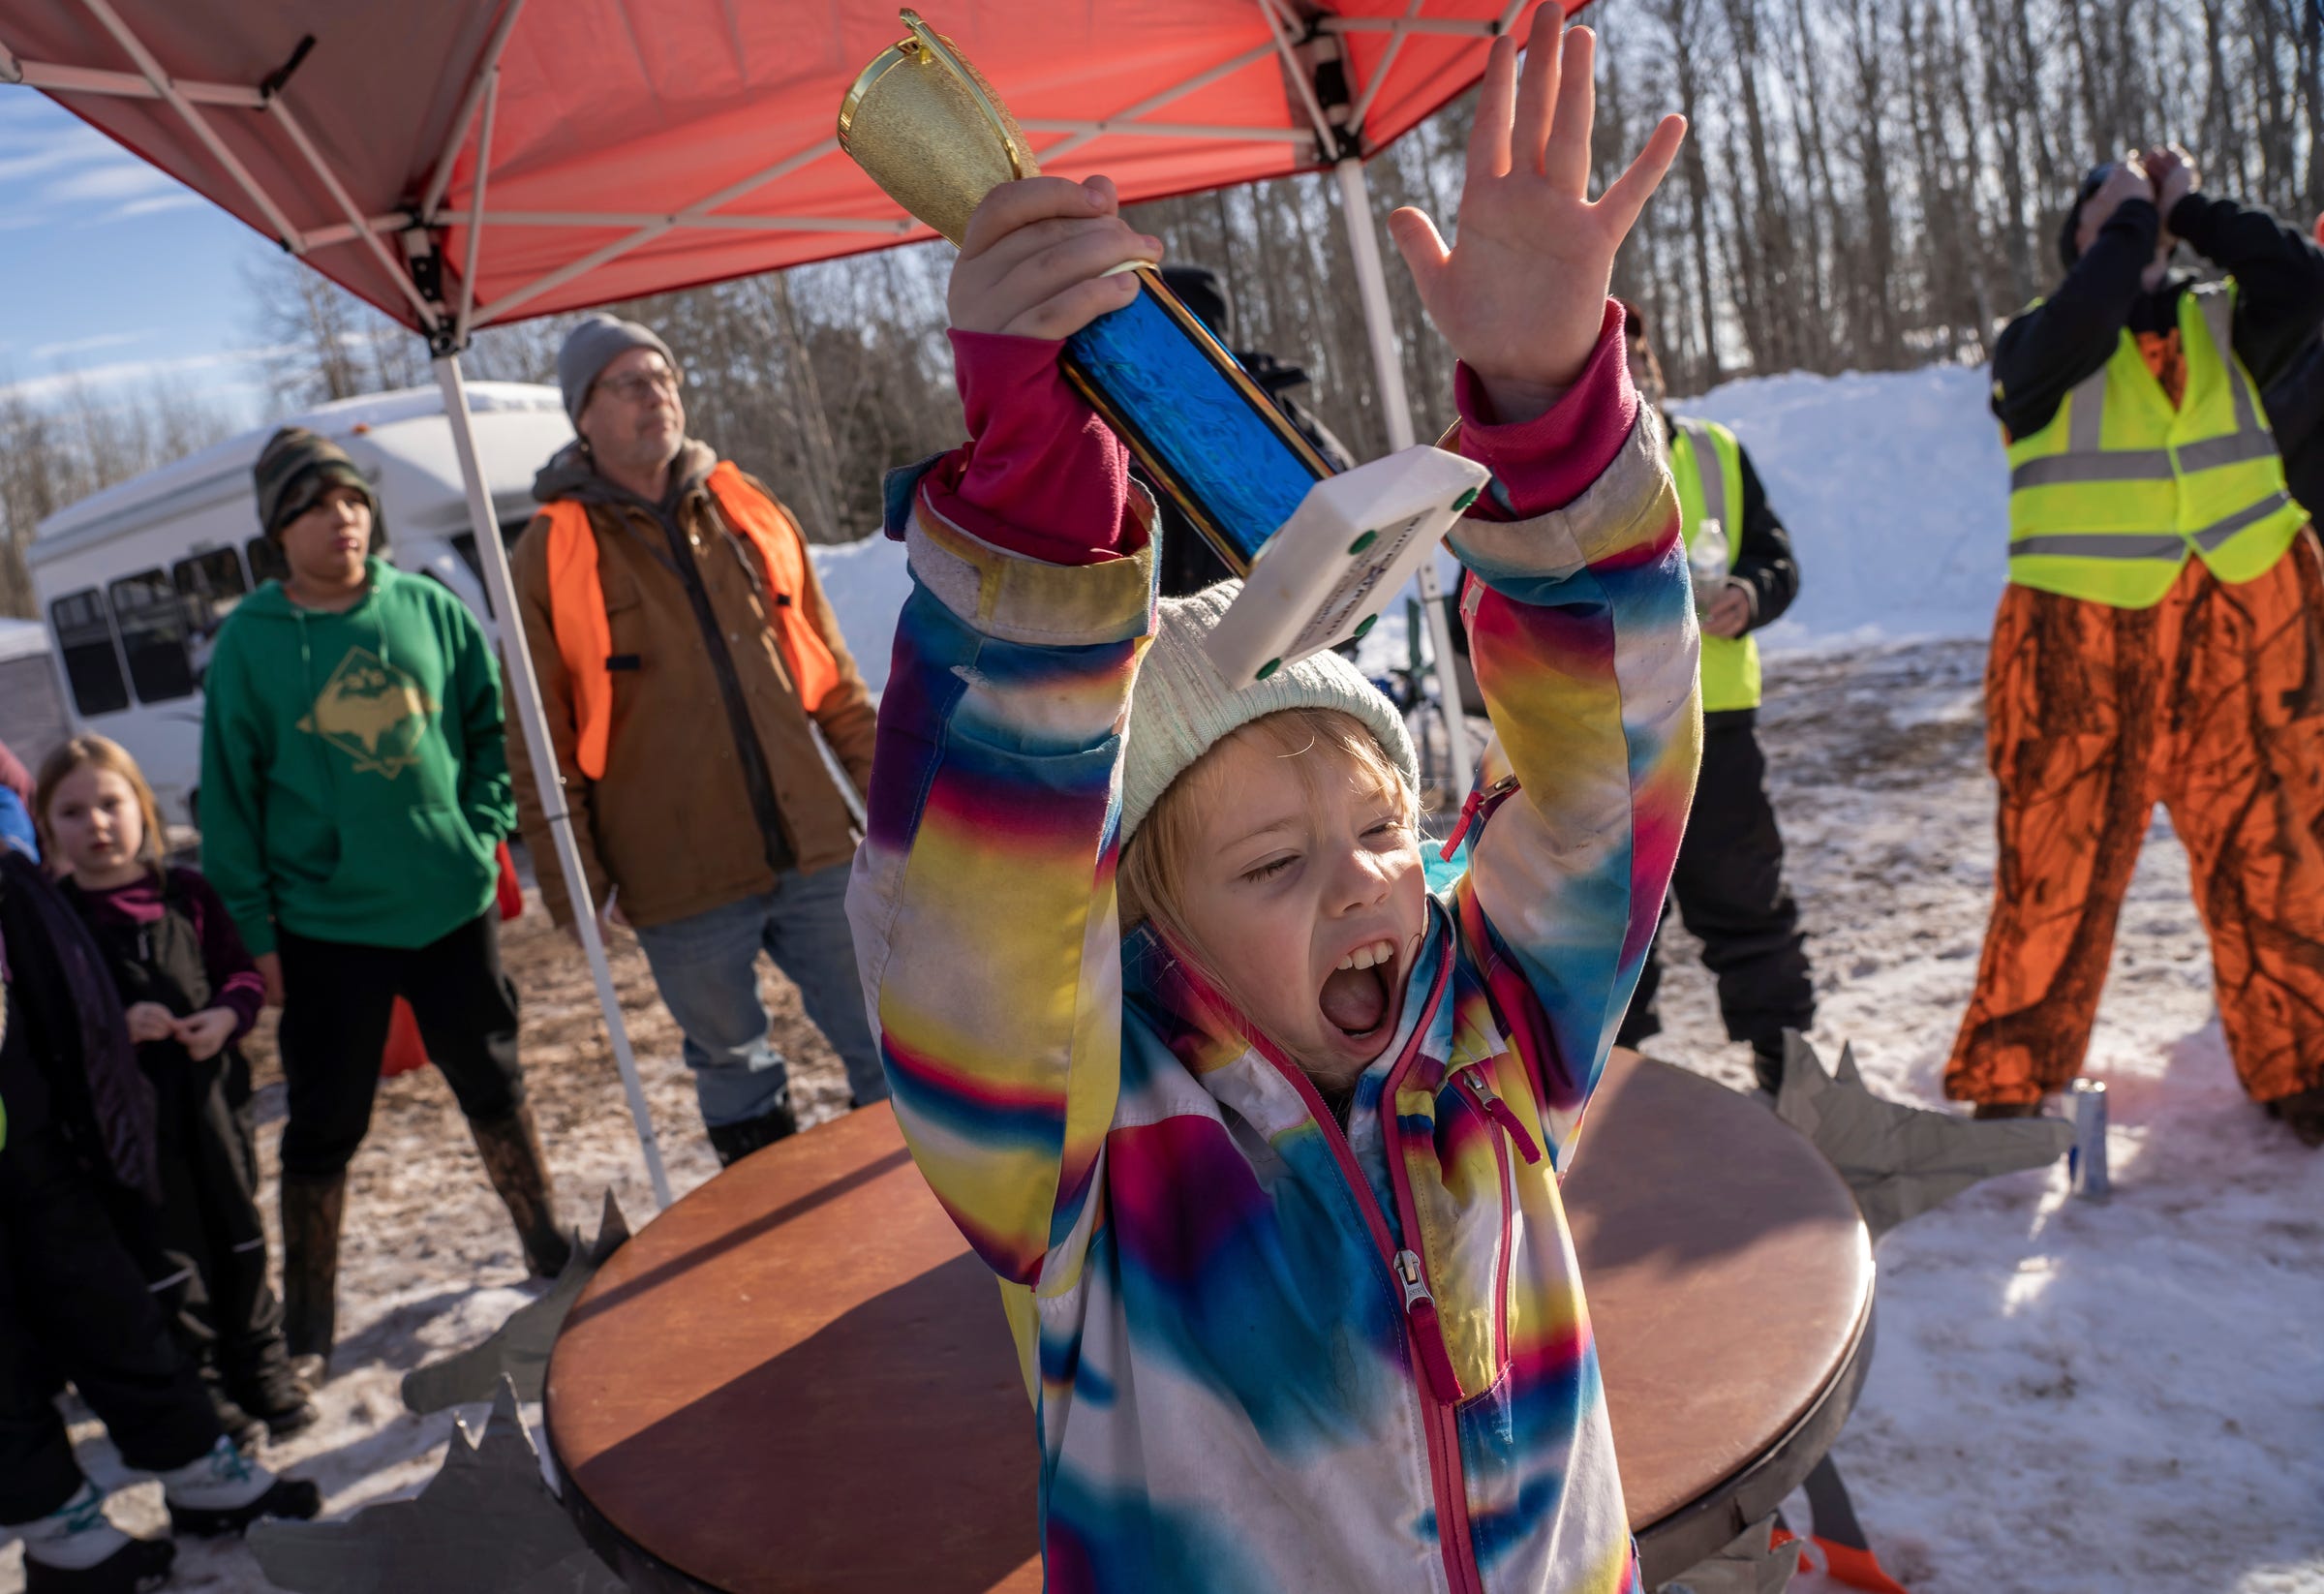 Addy Koponen, of Gwinn, cheers on others while holding her trophy at the end of the fourth annual K.I. Sawyer Cardboard Sled Races on Feb. 11, 2023 in Michigan's Upper Peninsula.